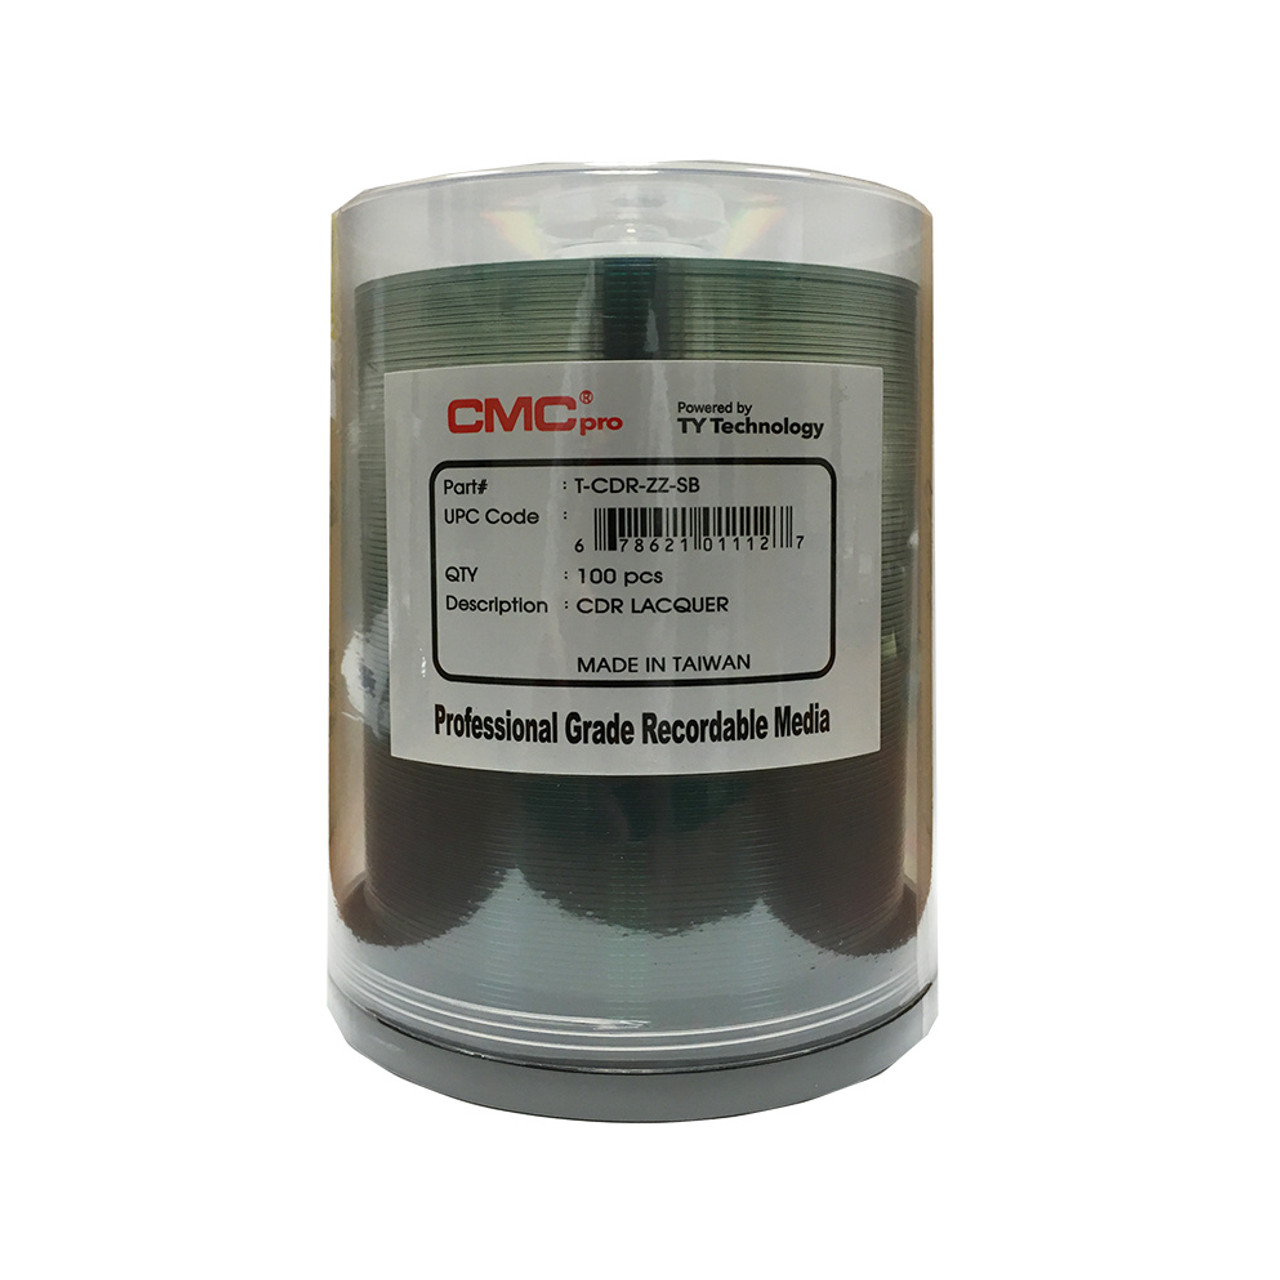 CMC Pro CD-R Disc Silver Lacquer Thermal Printable - T-CDR-ZZ-SB